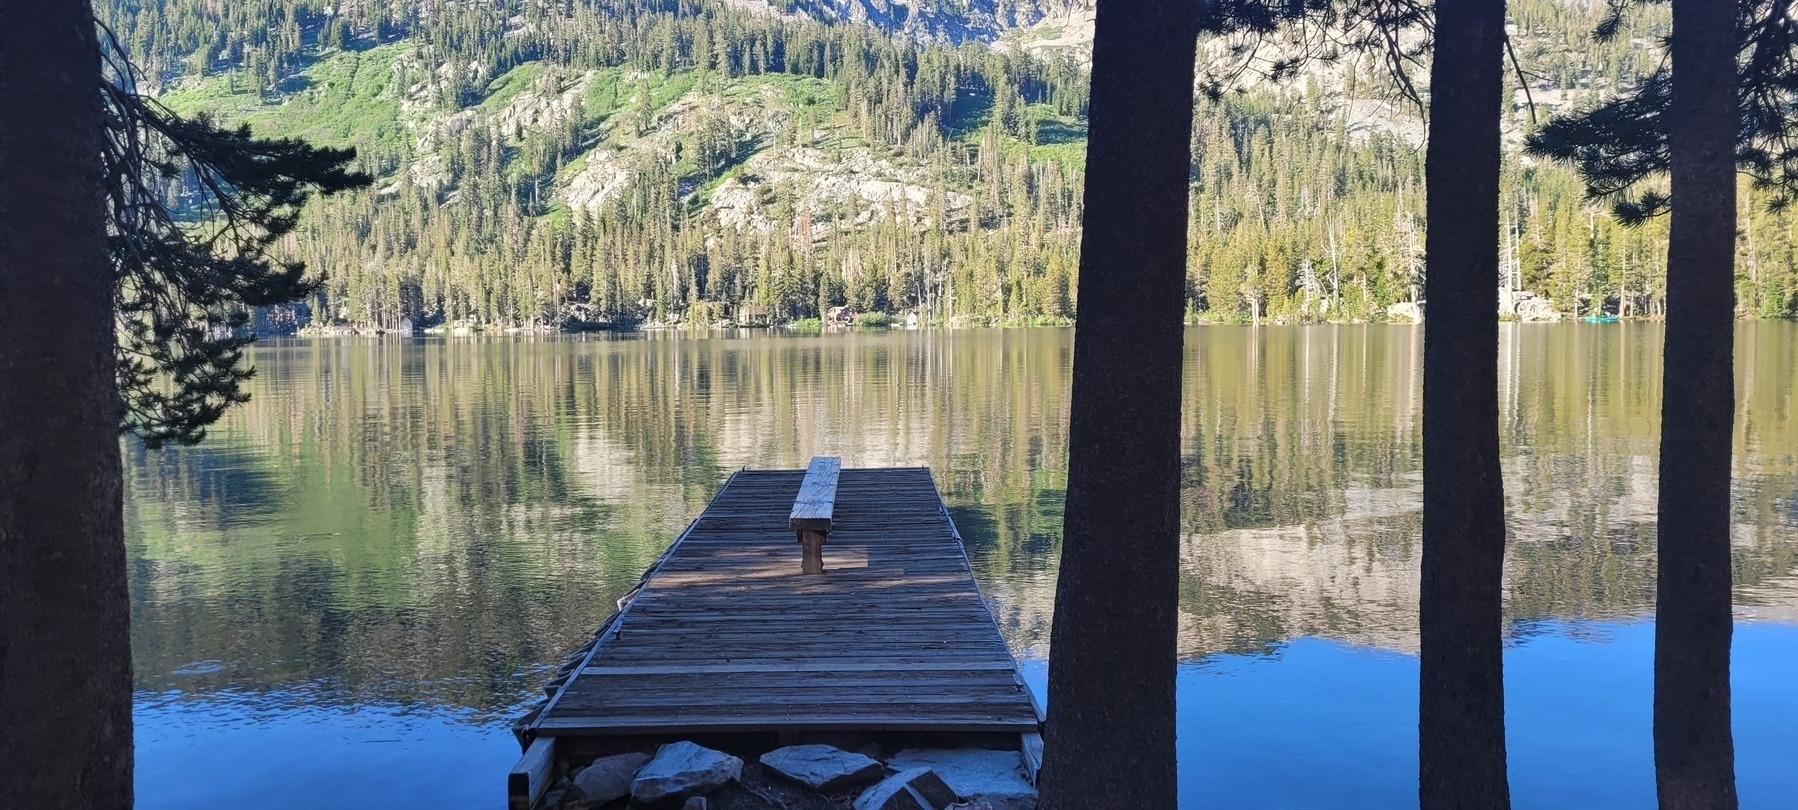 The dock at Echo Lake, an entrance/exit to Desolation Wilderness